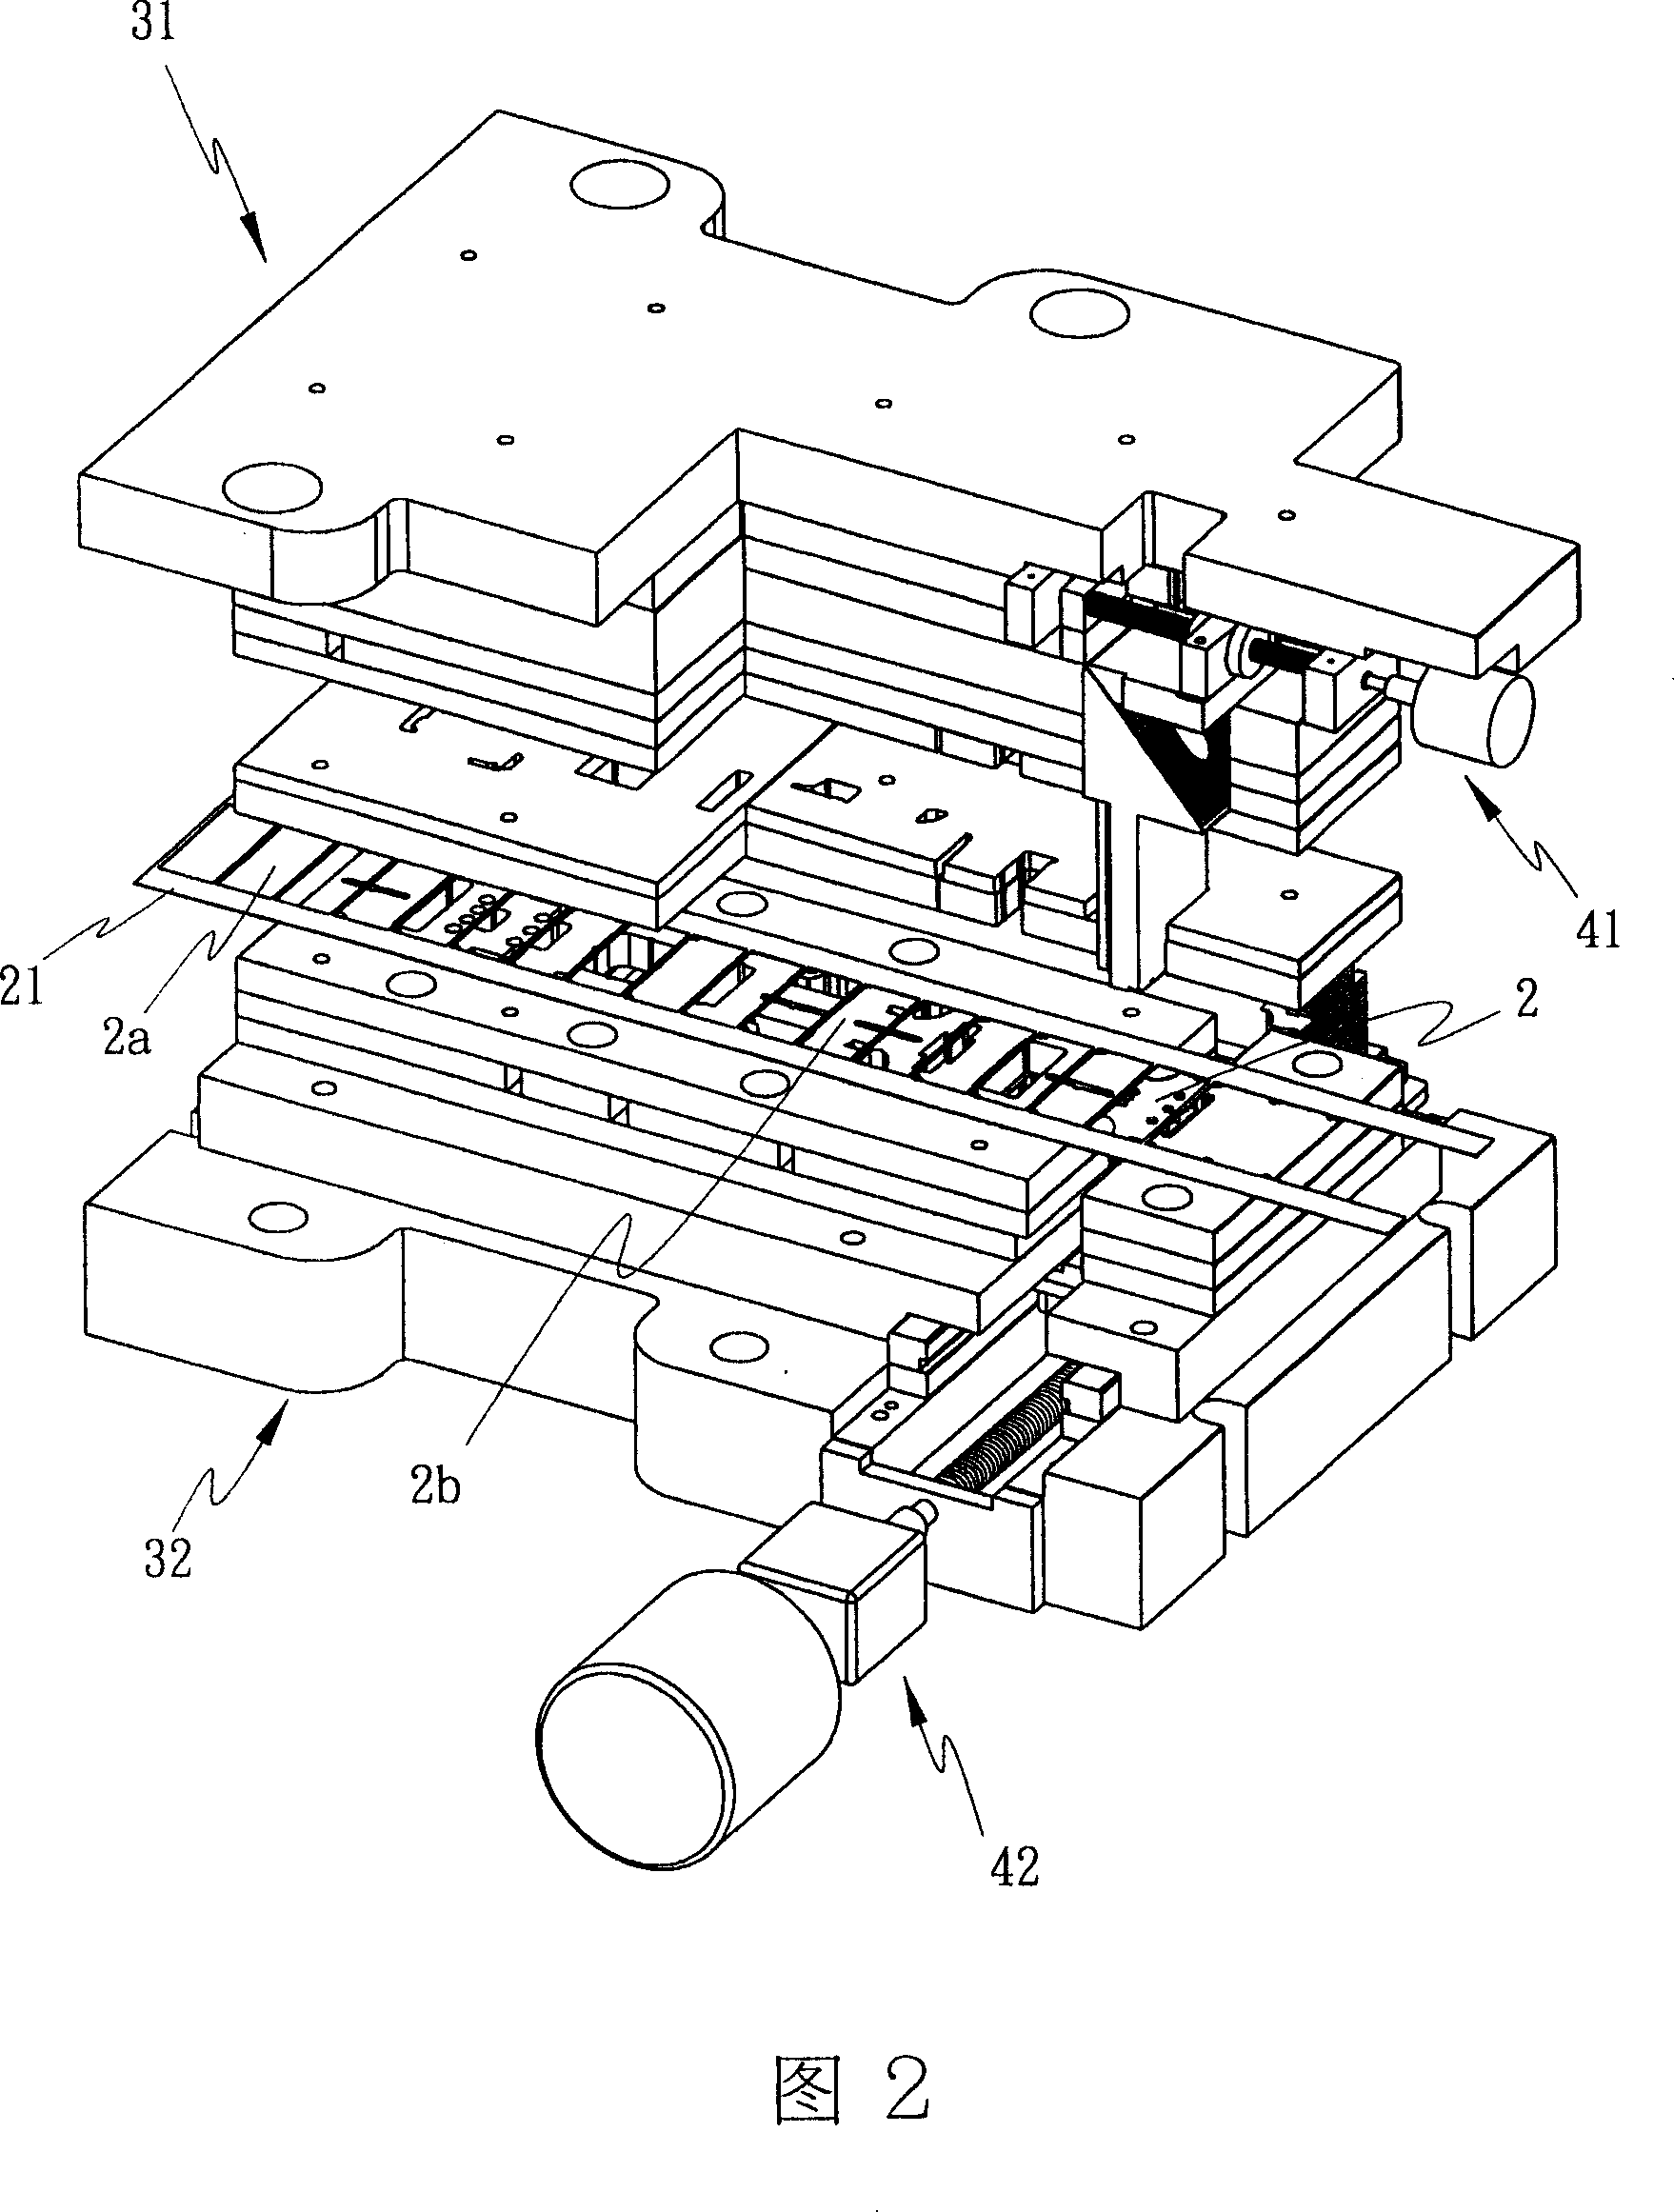 Equipment for automatic assembling of heat conducting tube and radiation fins